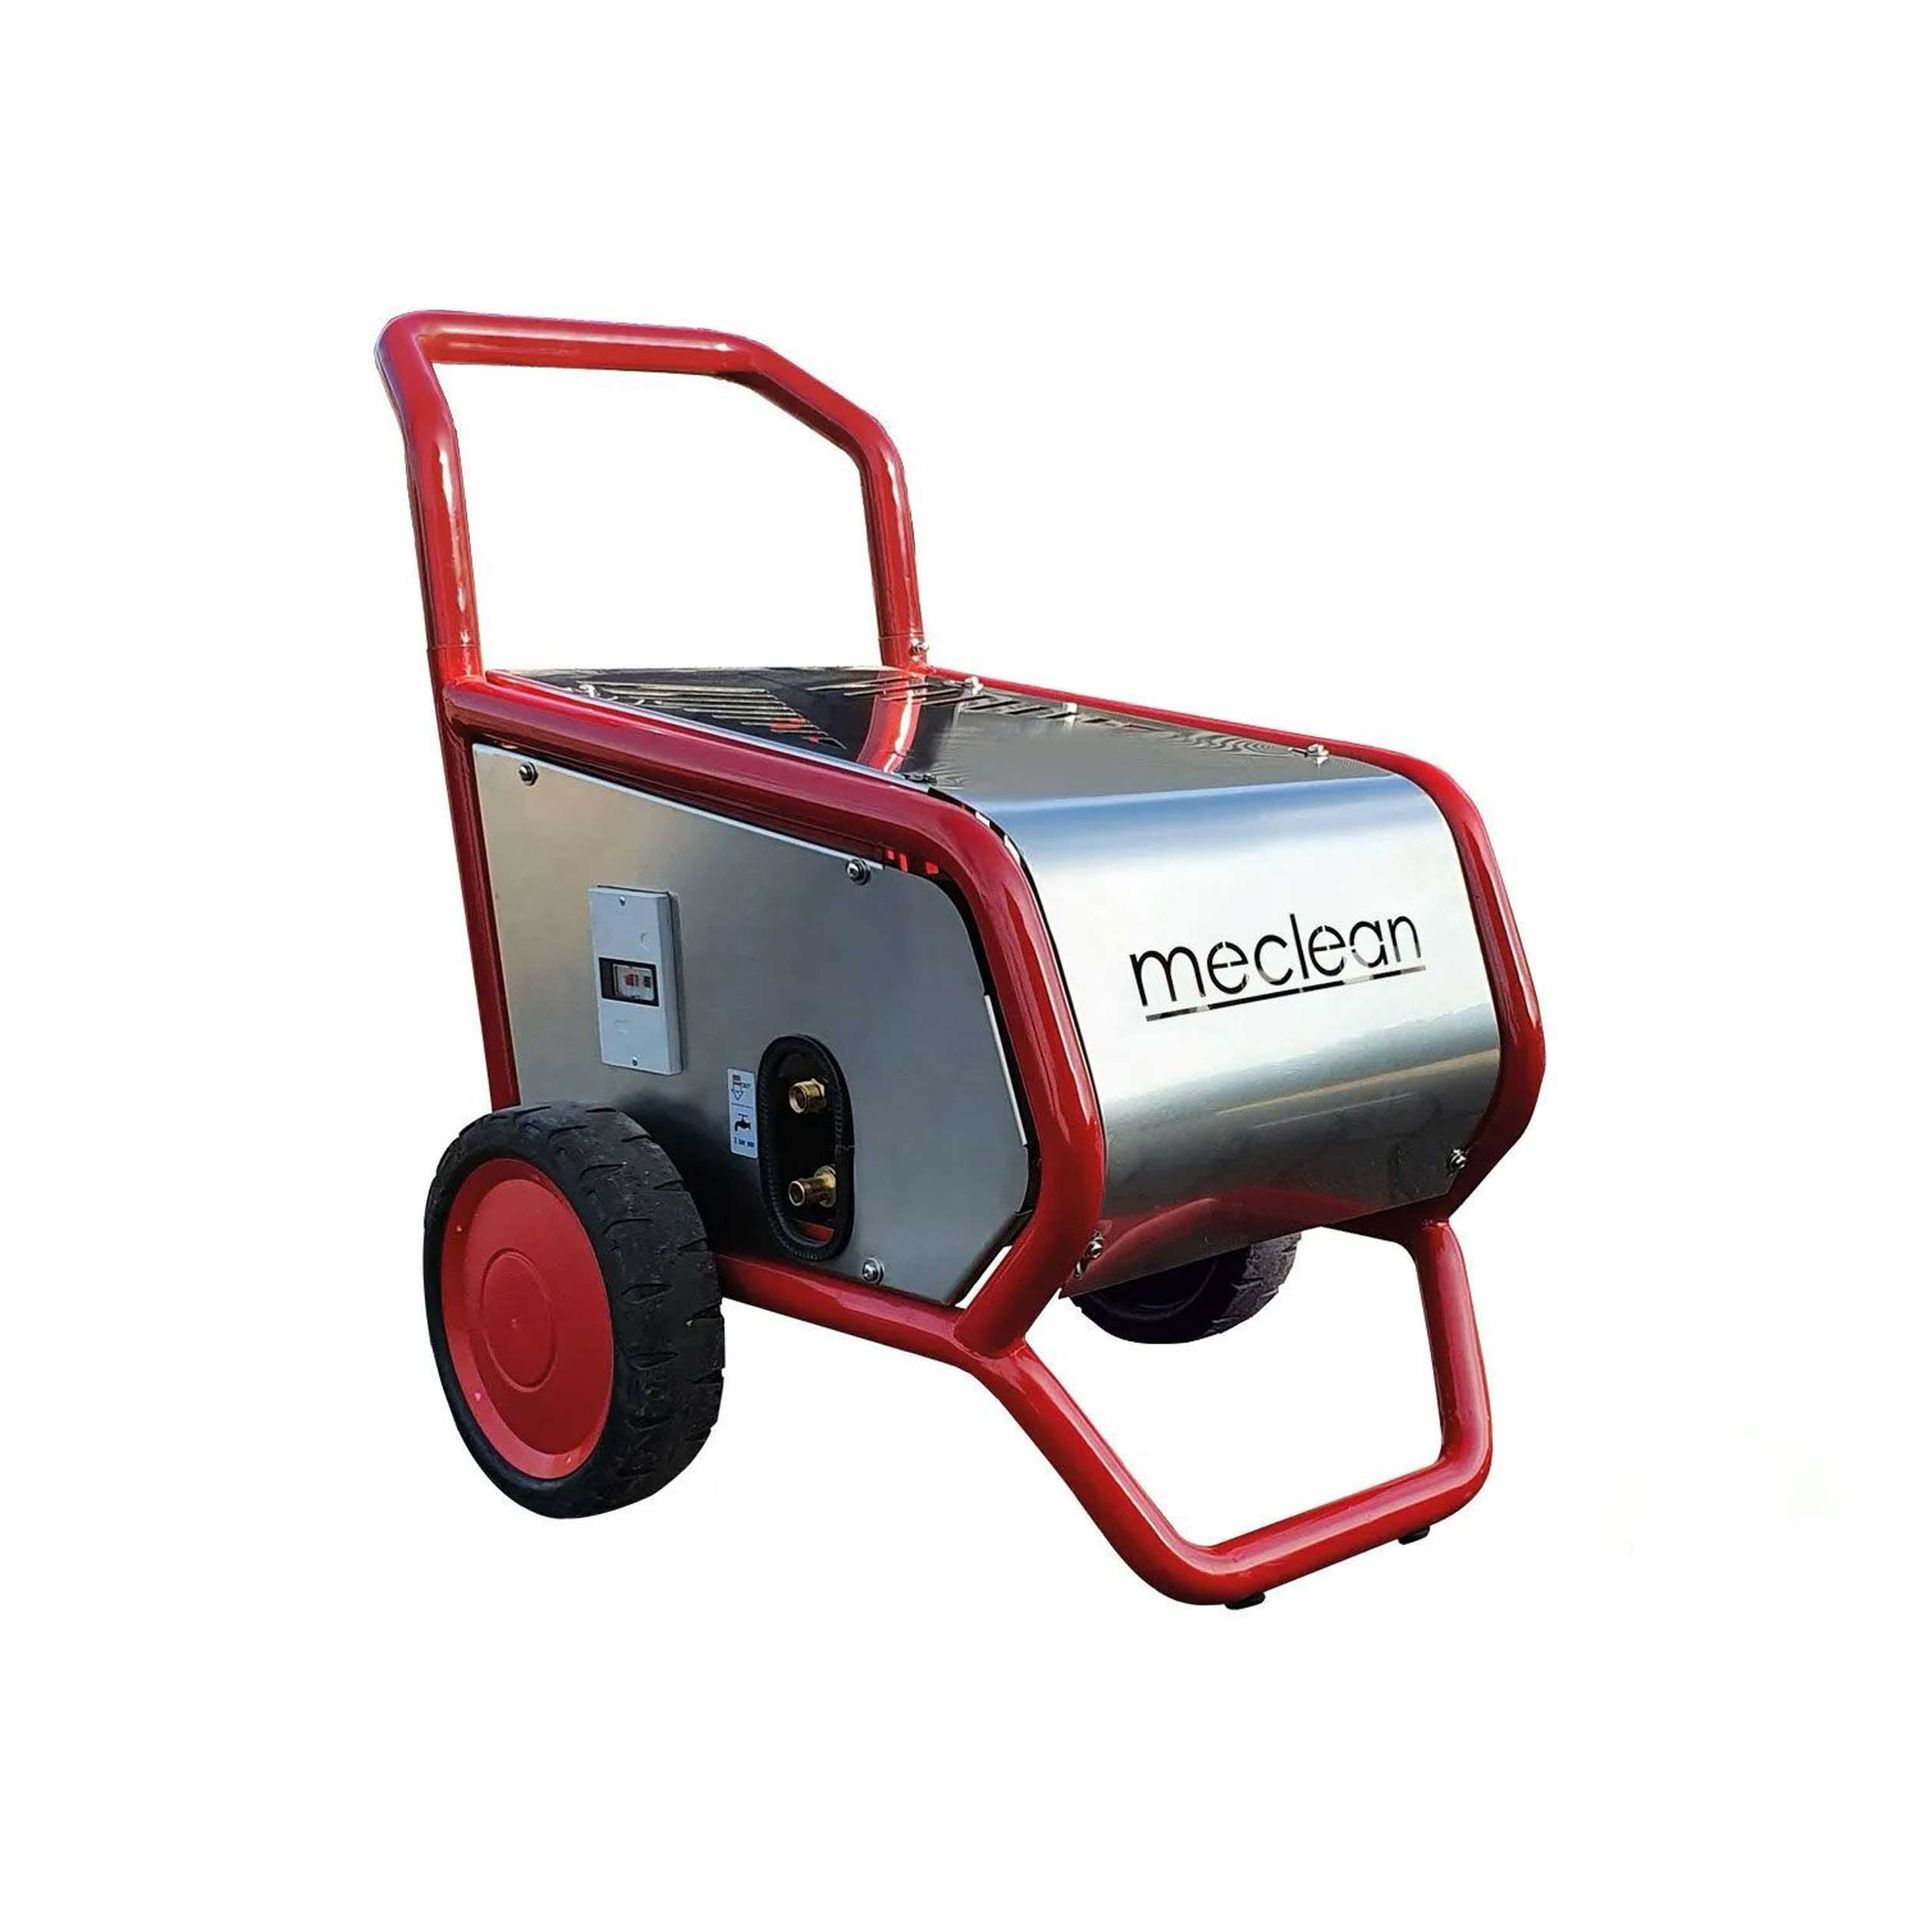 Meclean professional cold water high pressure washer POWERJET 150/21